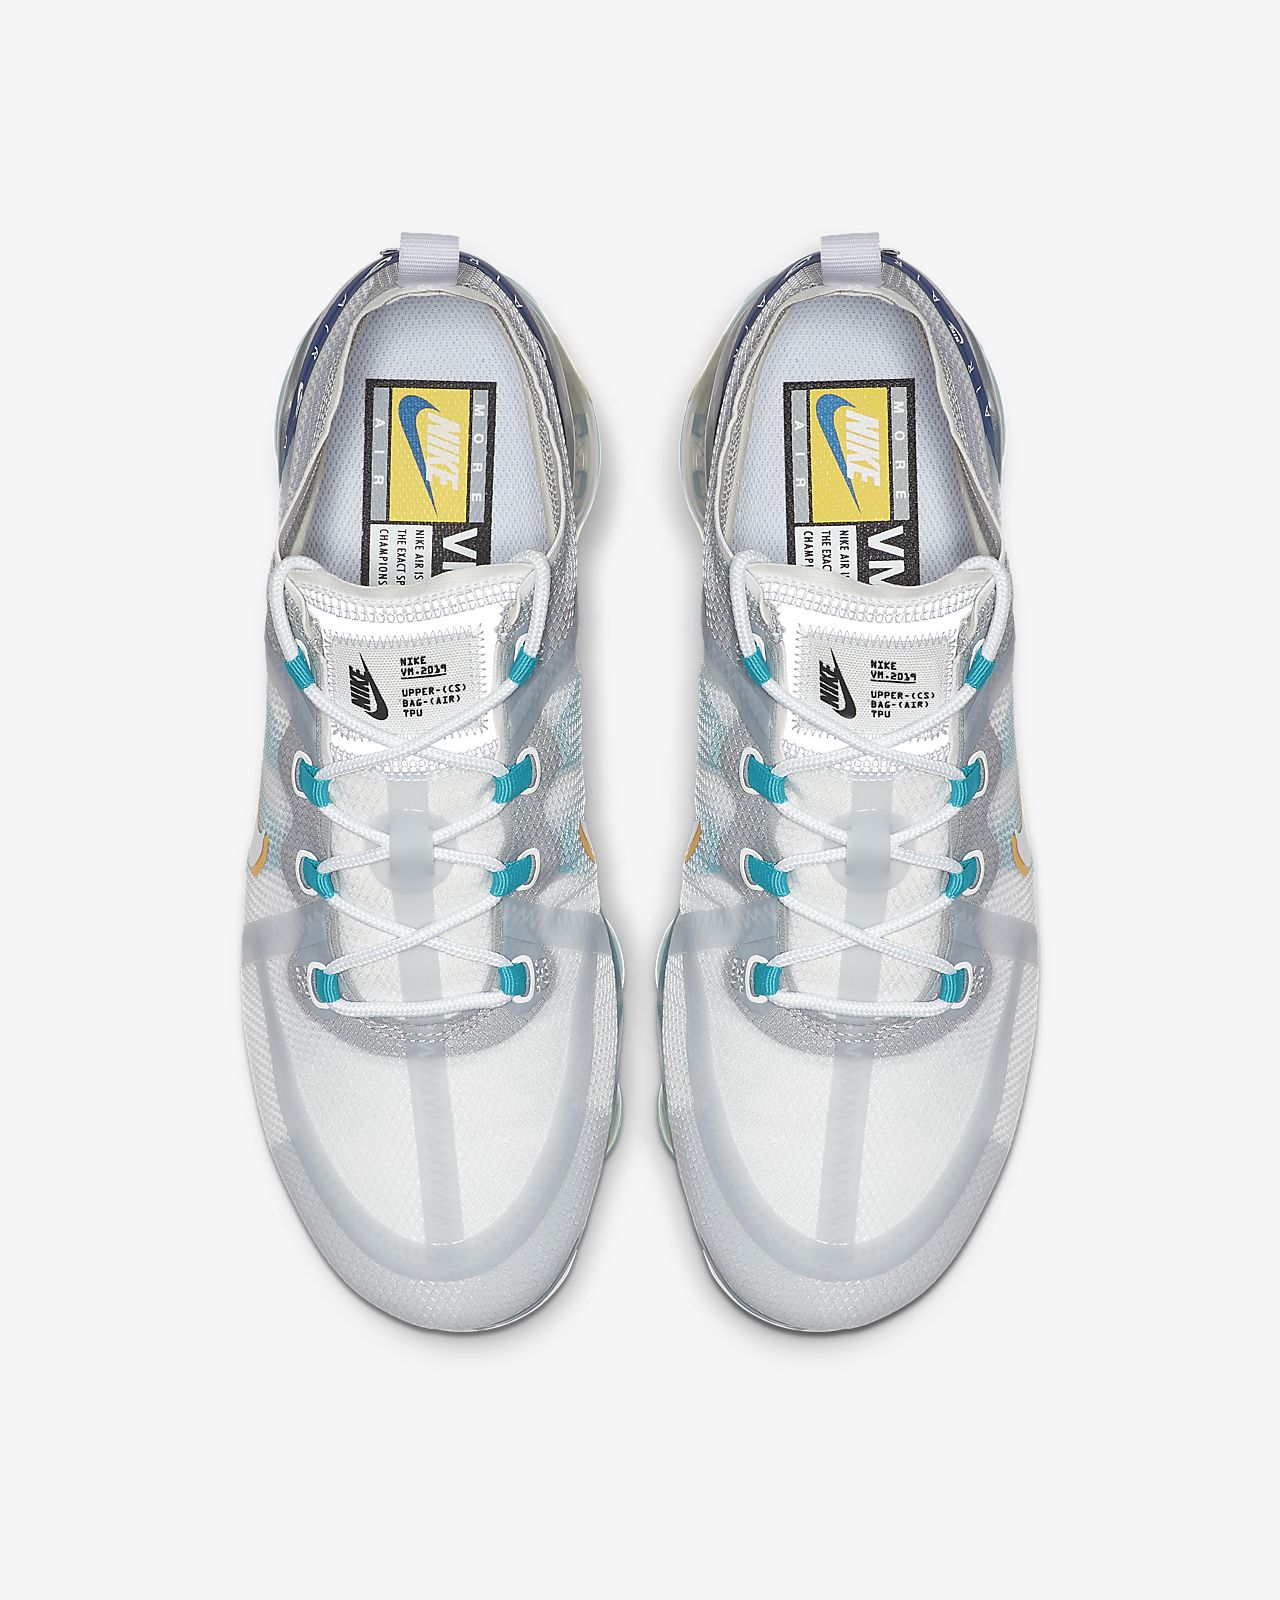 Product from Outlet Nike Air Vapormax Plus Sneakers low r